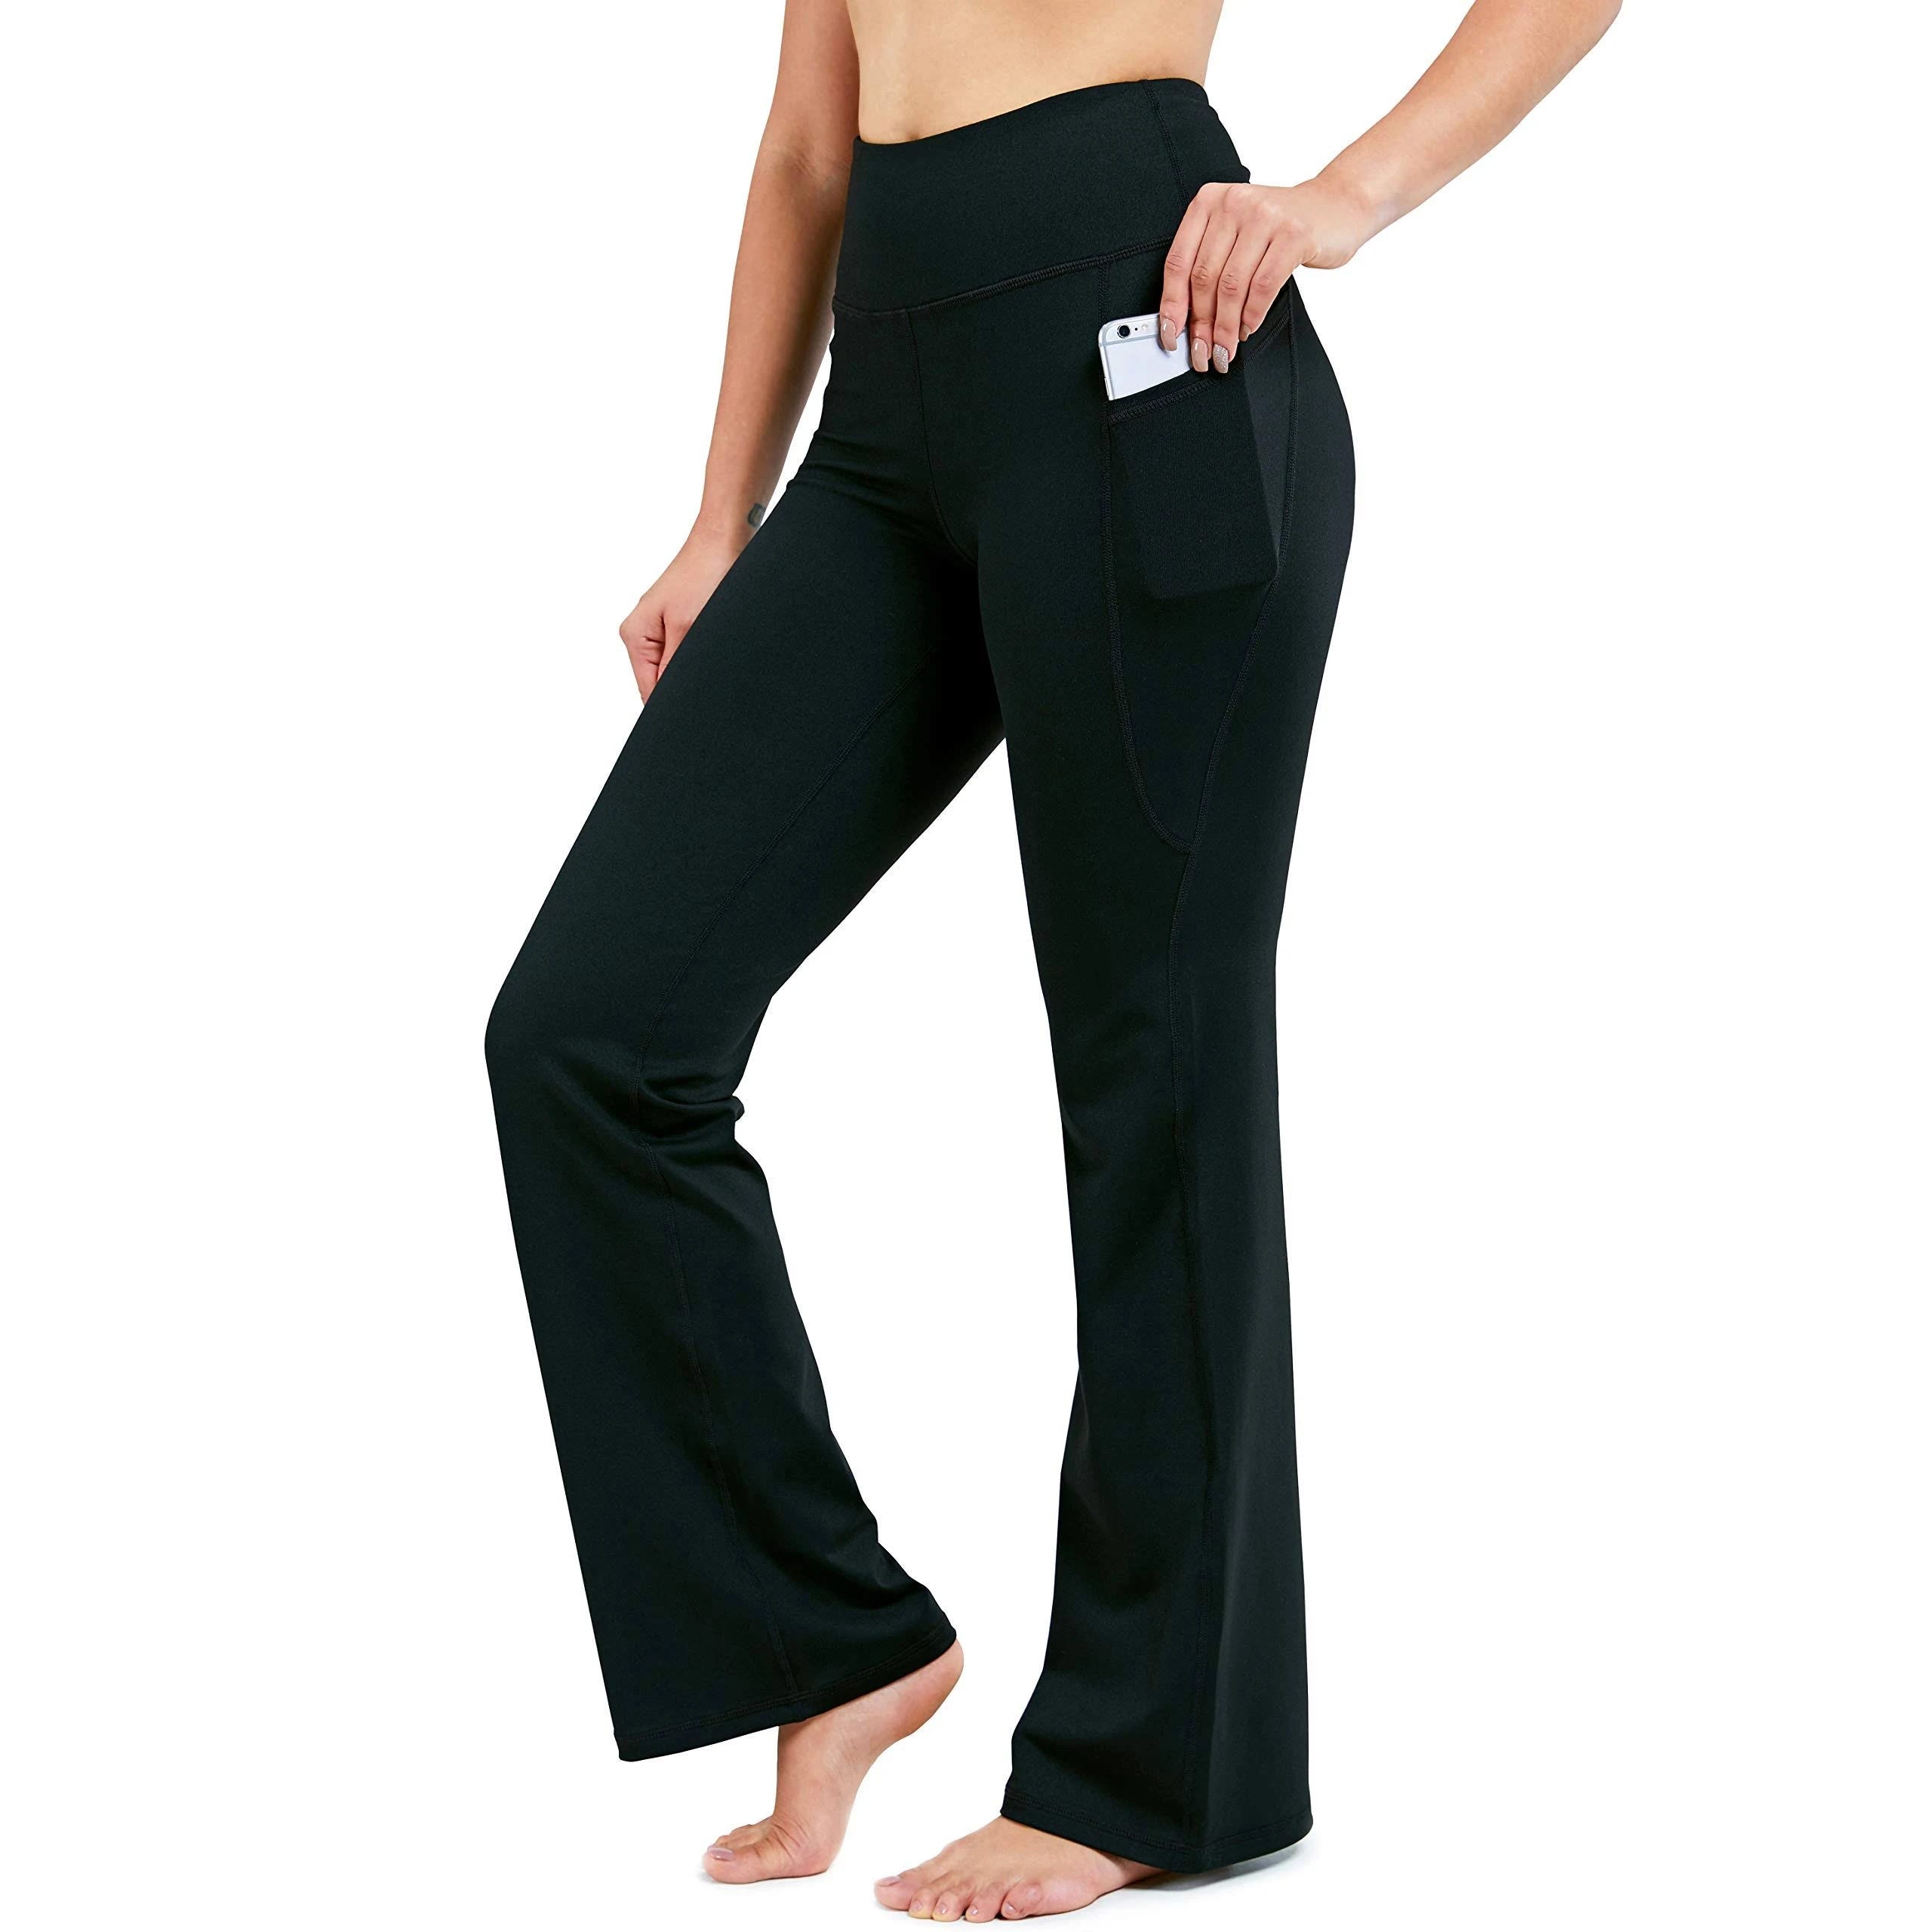 High-Waisted Yoga Pants for Women: Bootcut Leggings with Side Pockets | Image